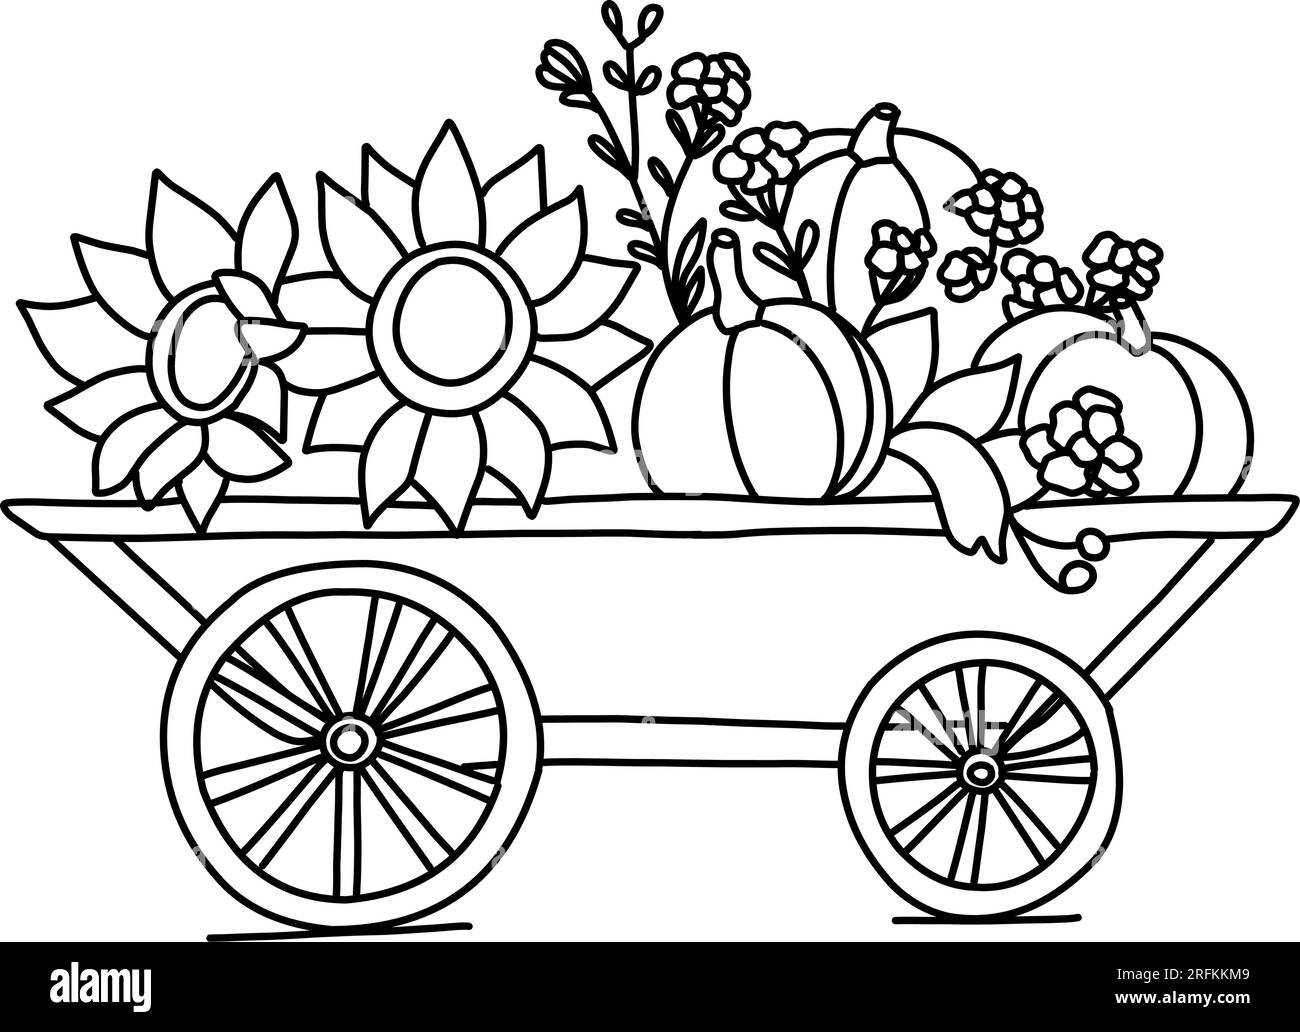 Coloring page with sunflowers, autumn coloring. Stock Vector